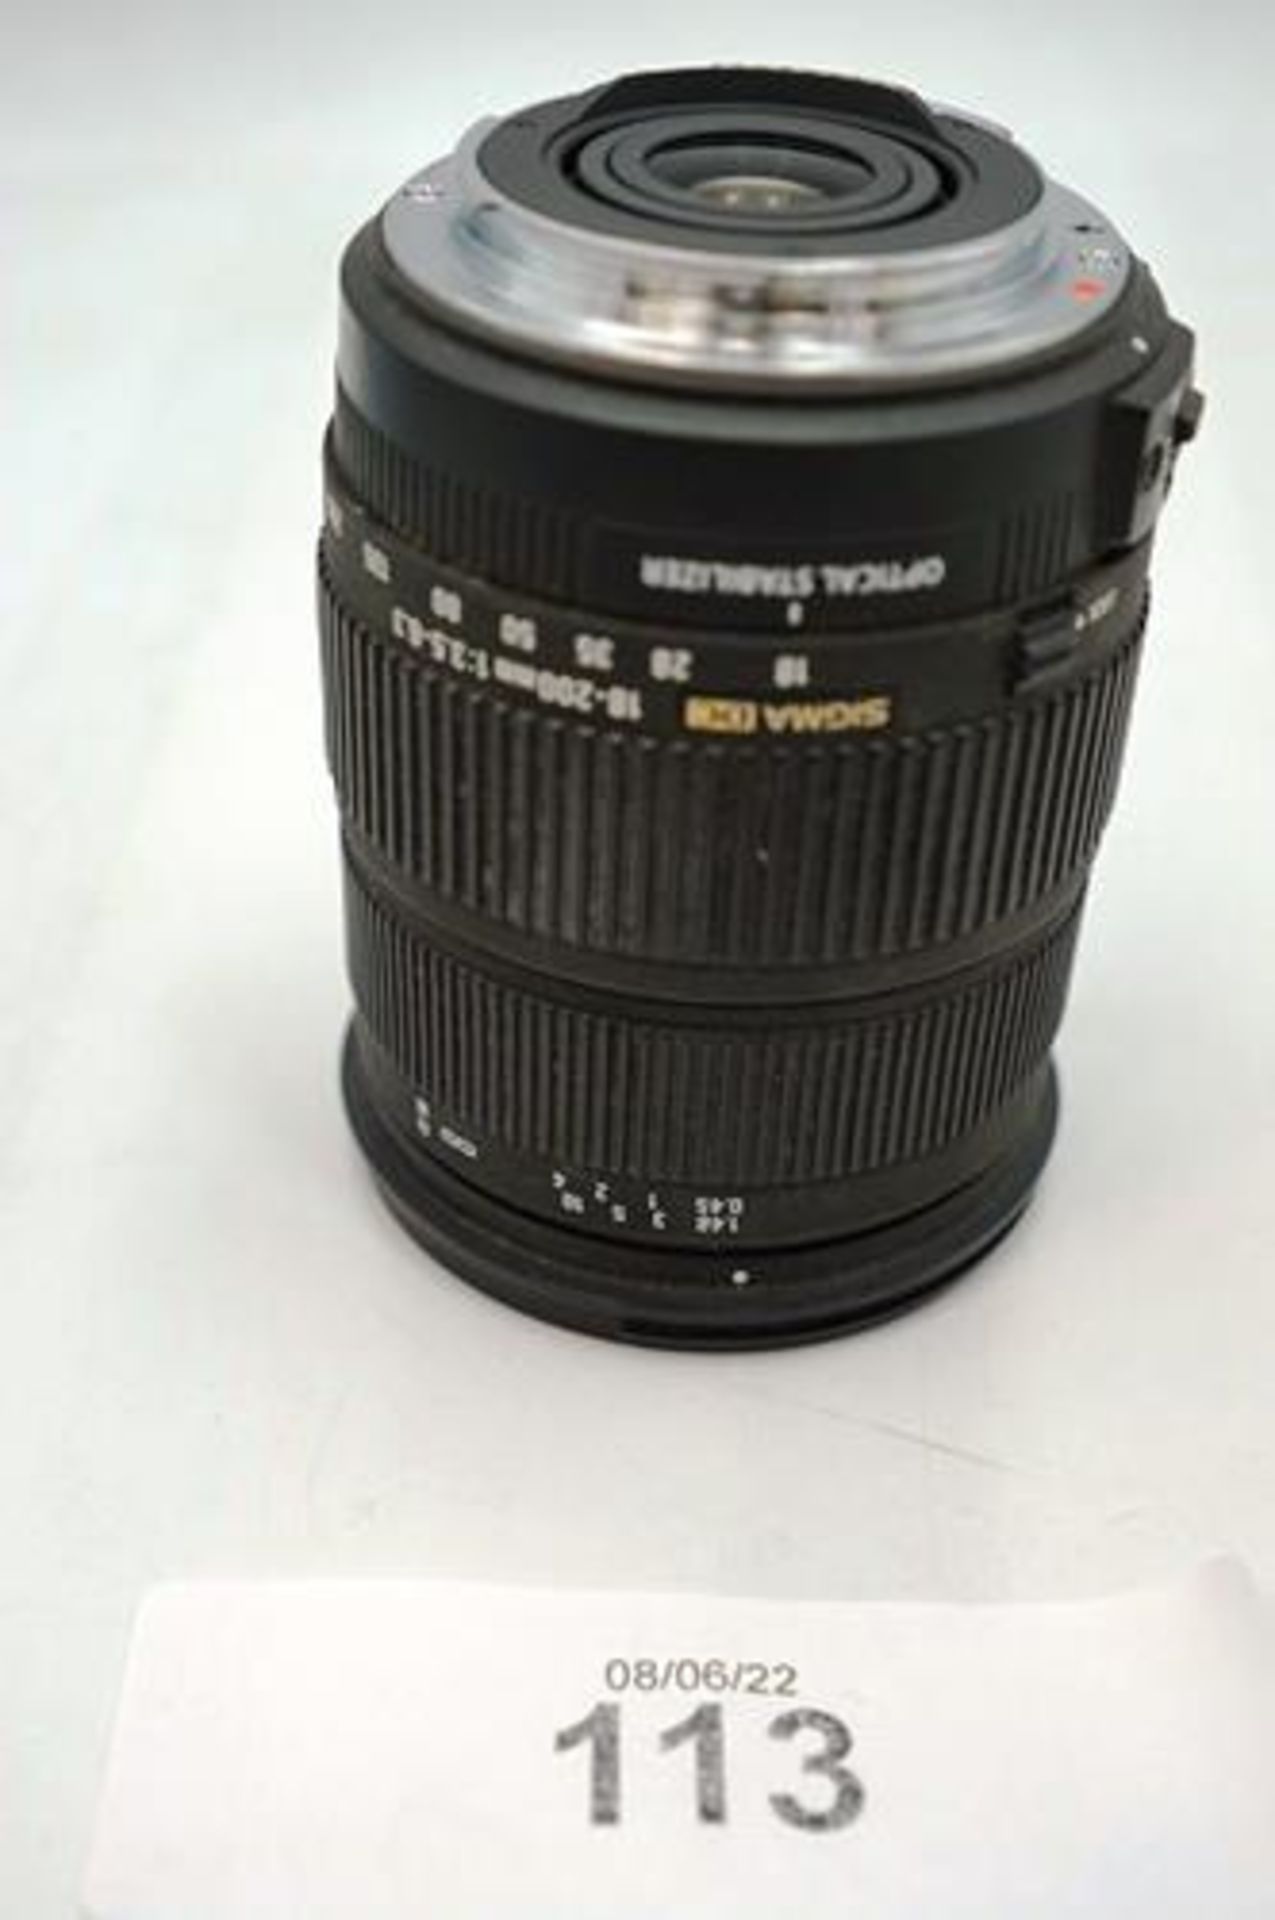 1 x Canon Sigma DC 18-200mm, 1:3.5 - 6.3 camera lens - Second-hand, tested working (Cab1) - Image 2 of 4